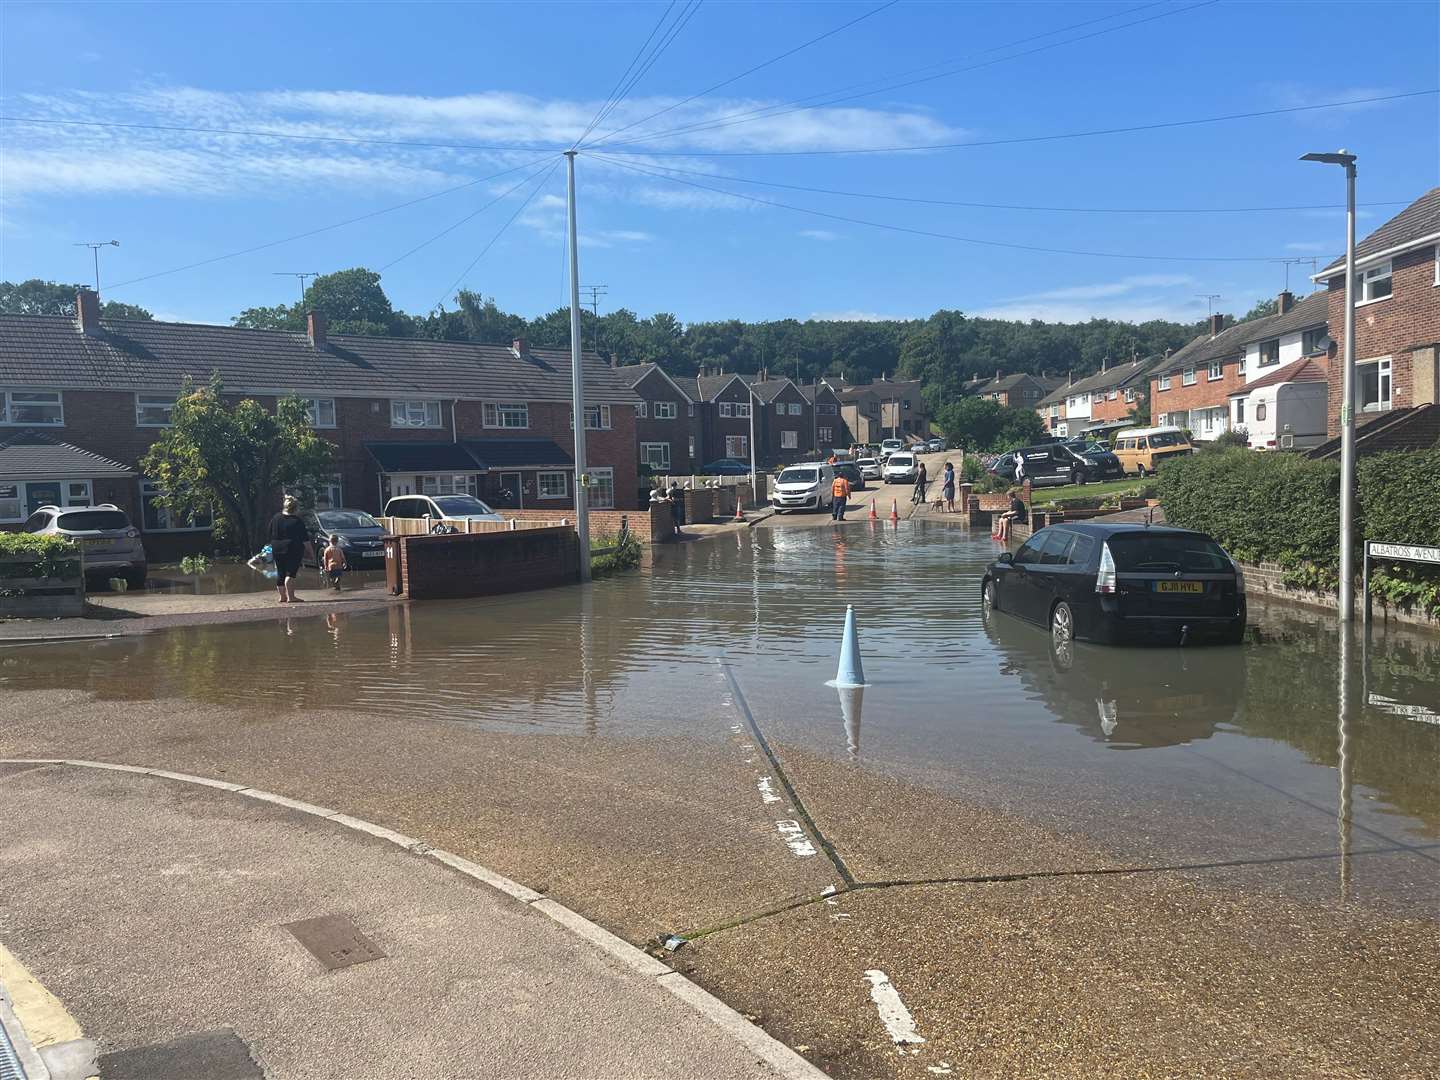 Part of Albatross Avenue in Strood was flooded